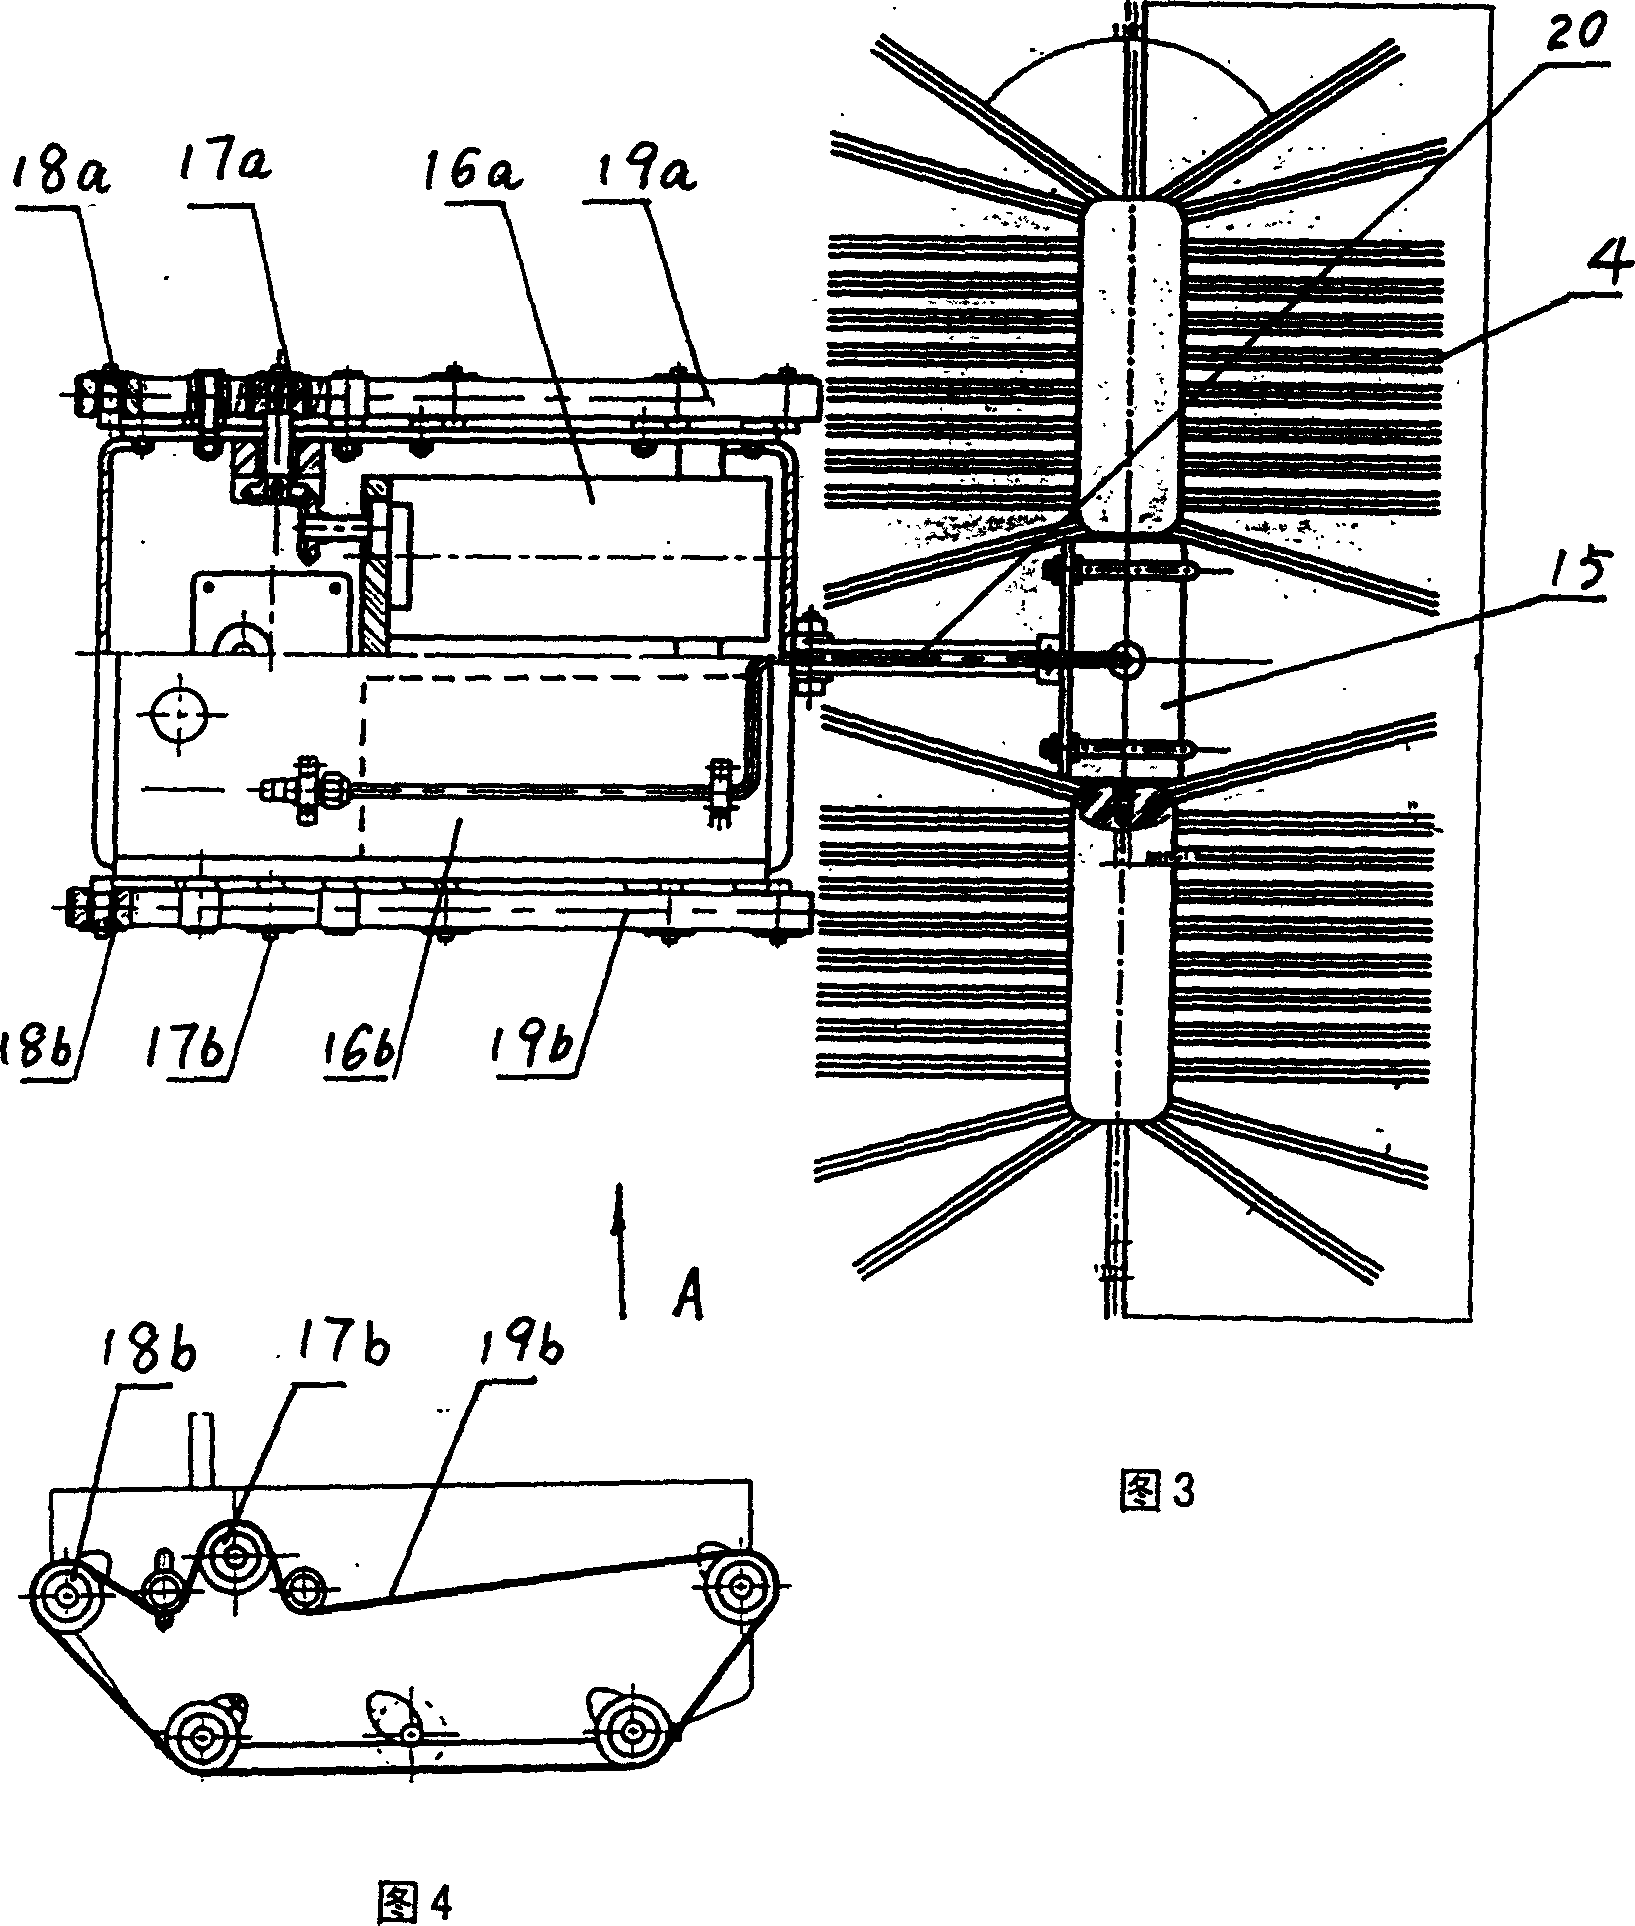 Device for cleaning ventilating duct of central air conditioner